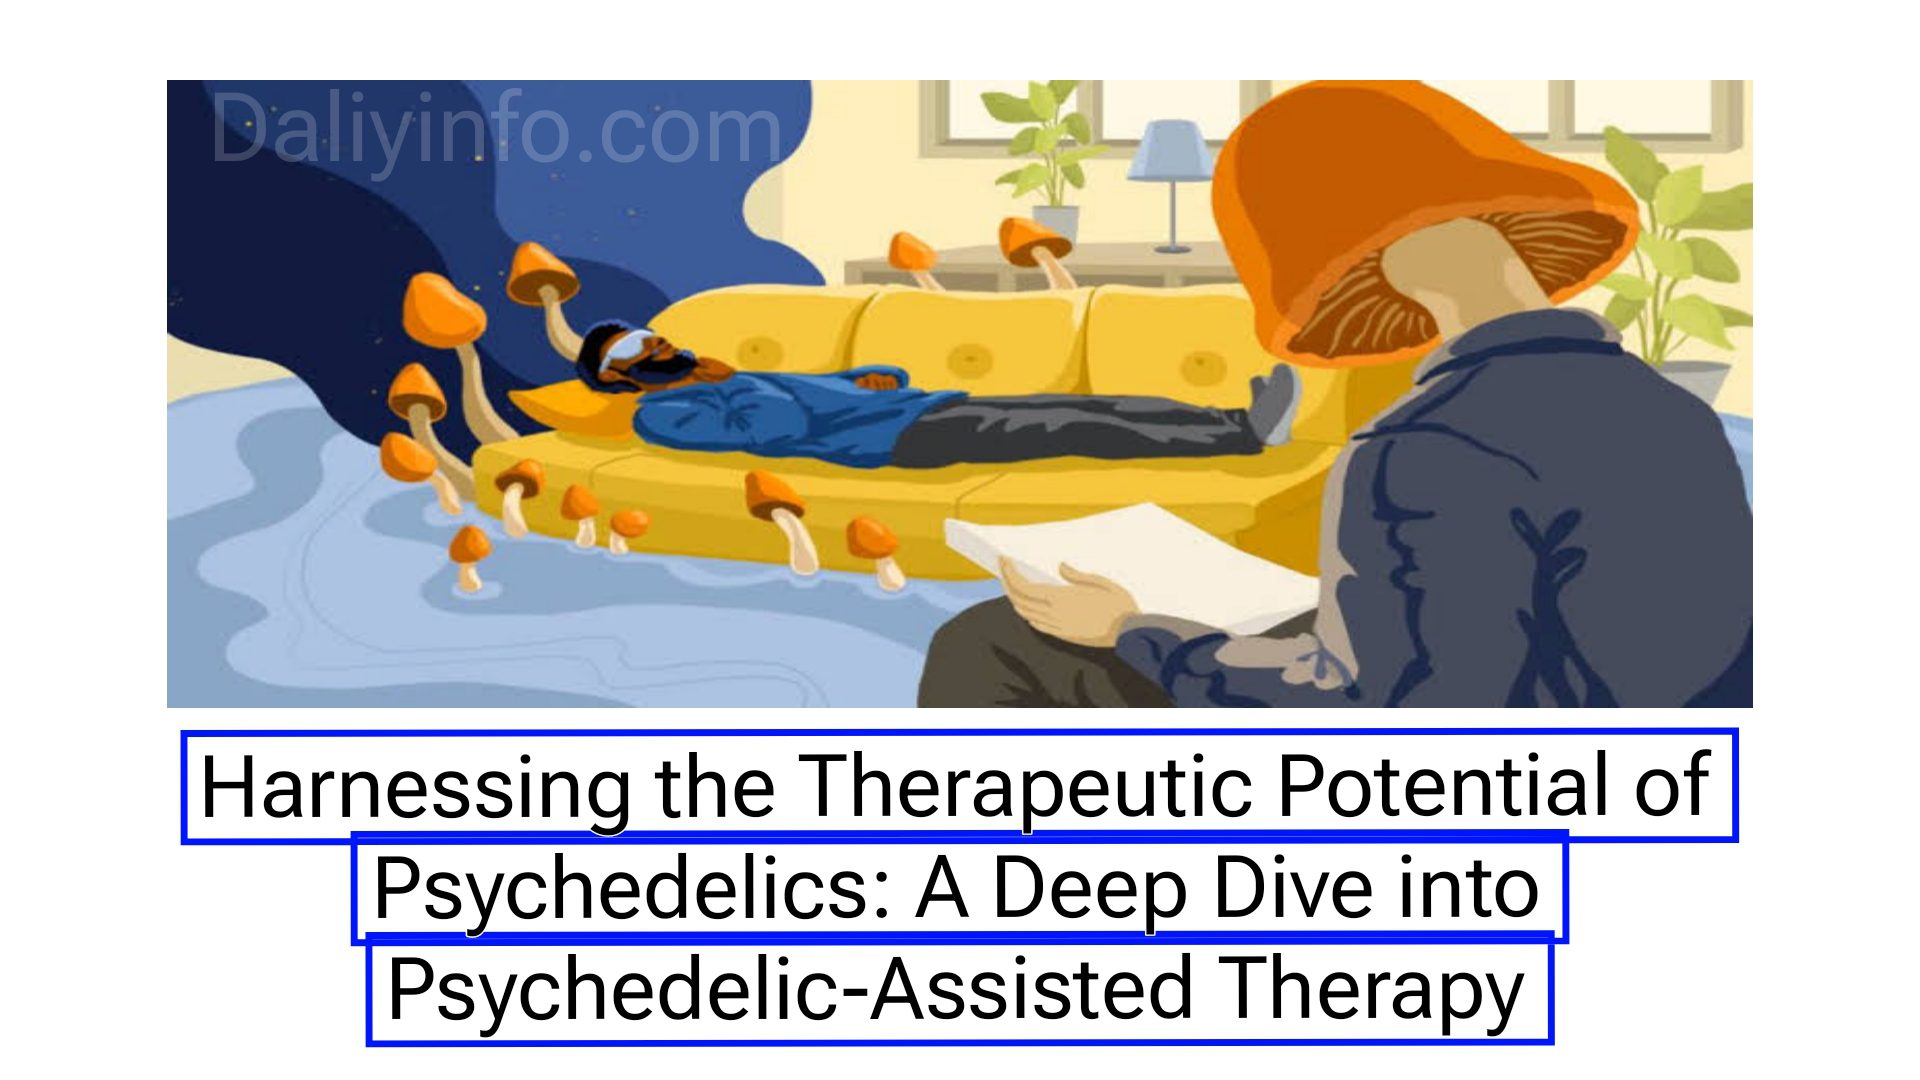 Harnessing the Therapeutic Potential of Psychedelics: A Deep Dive into Psychedelic-Assisted Therapy